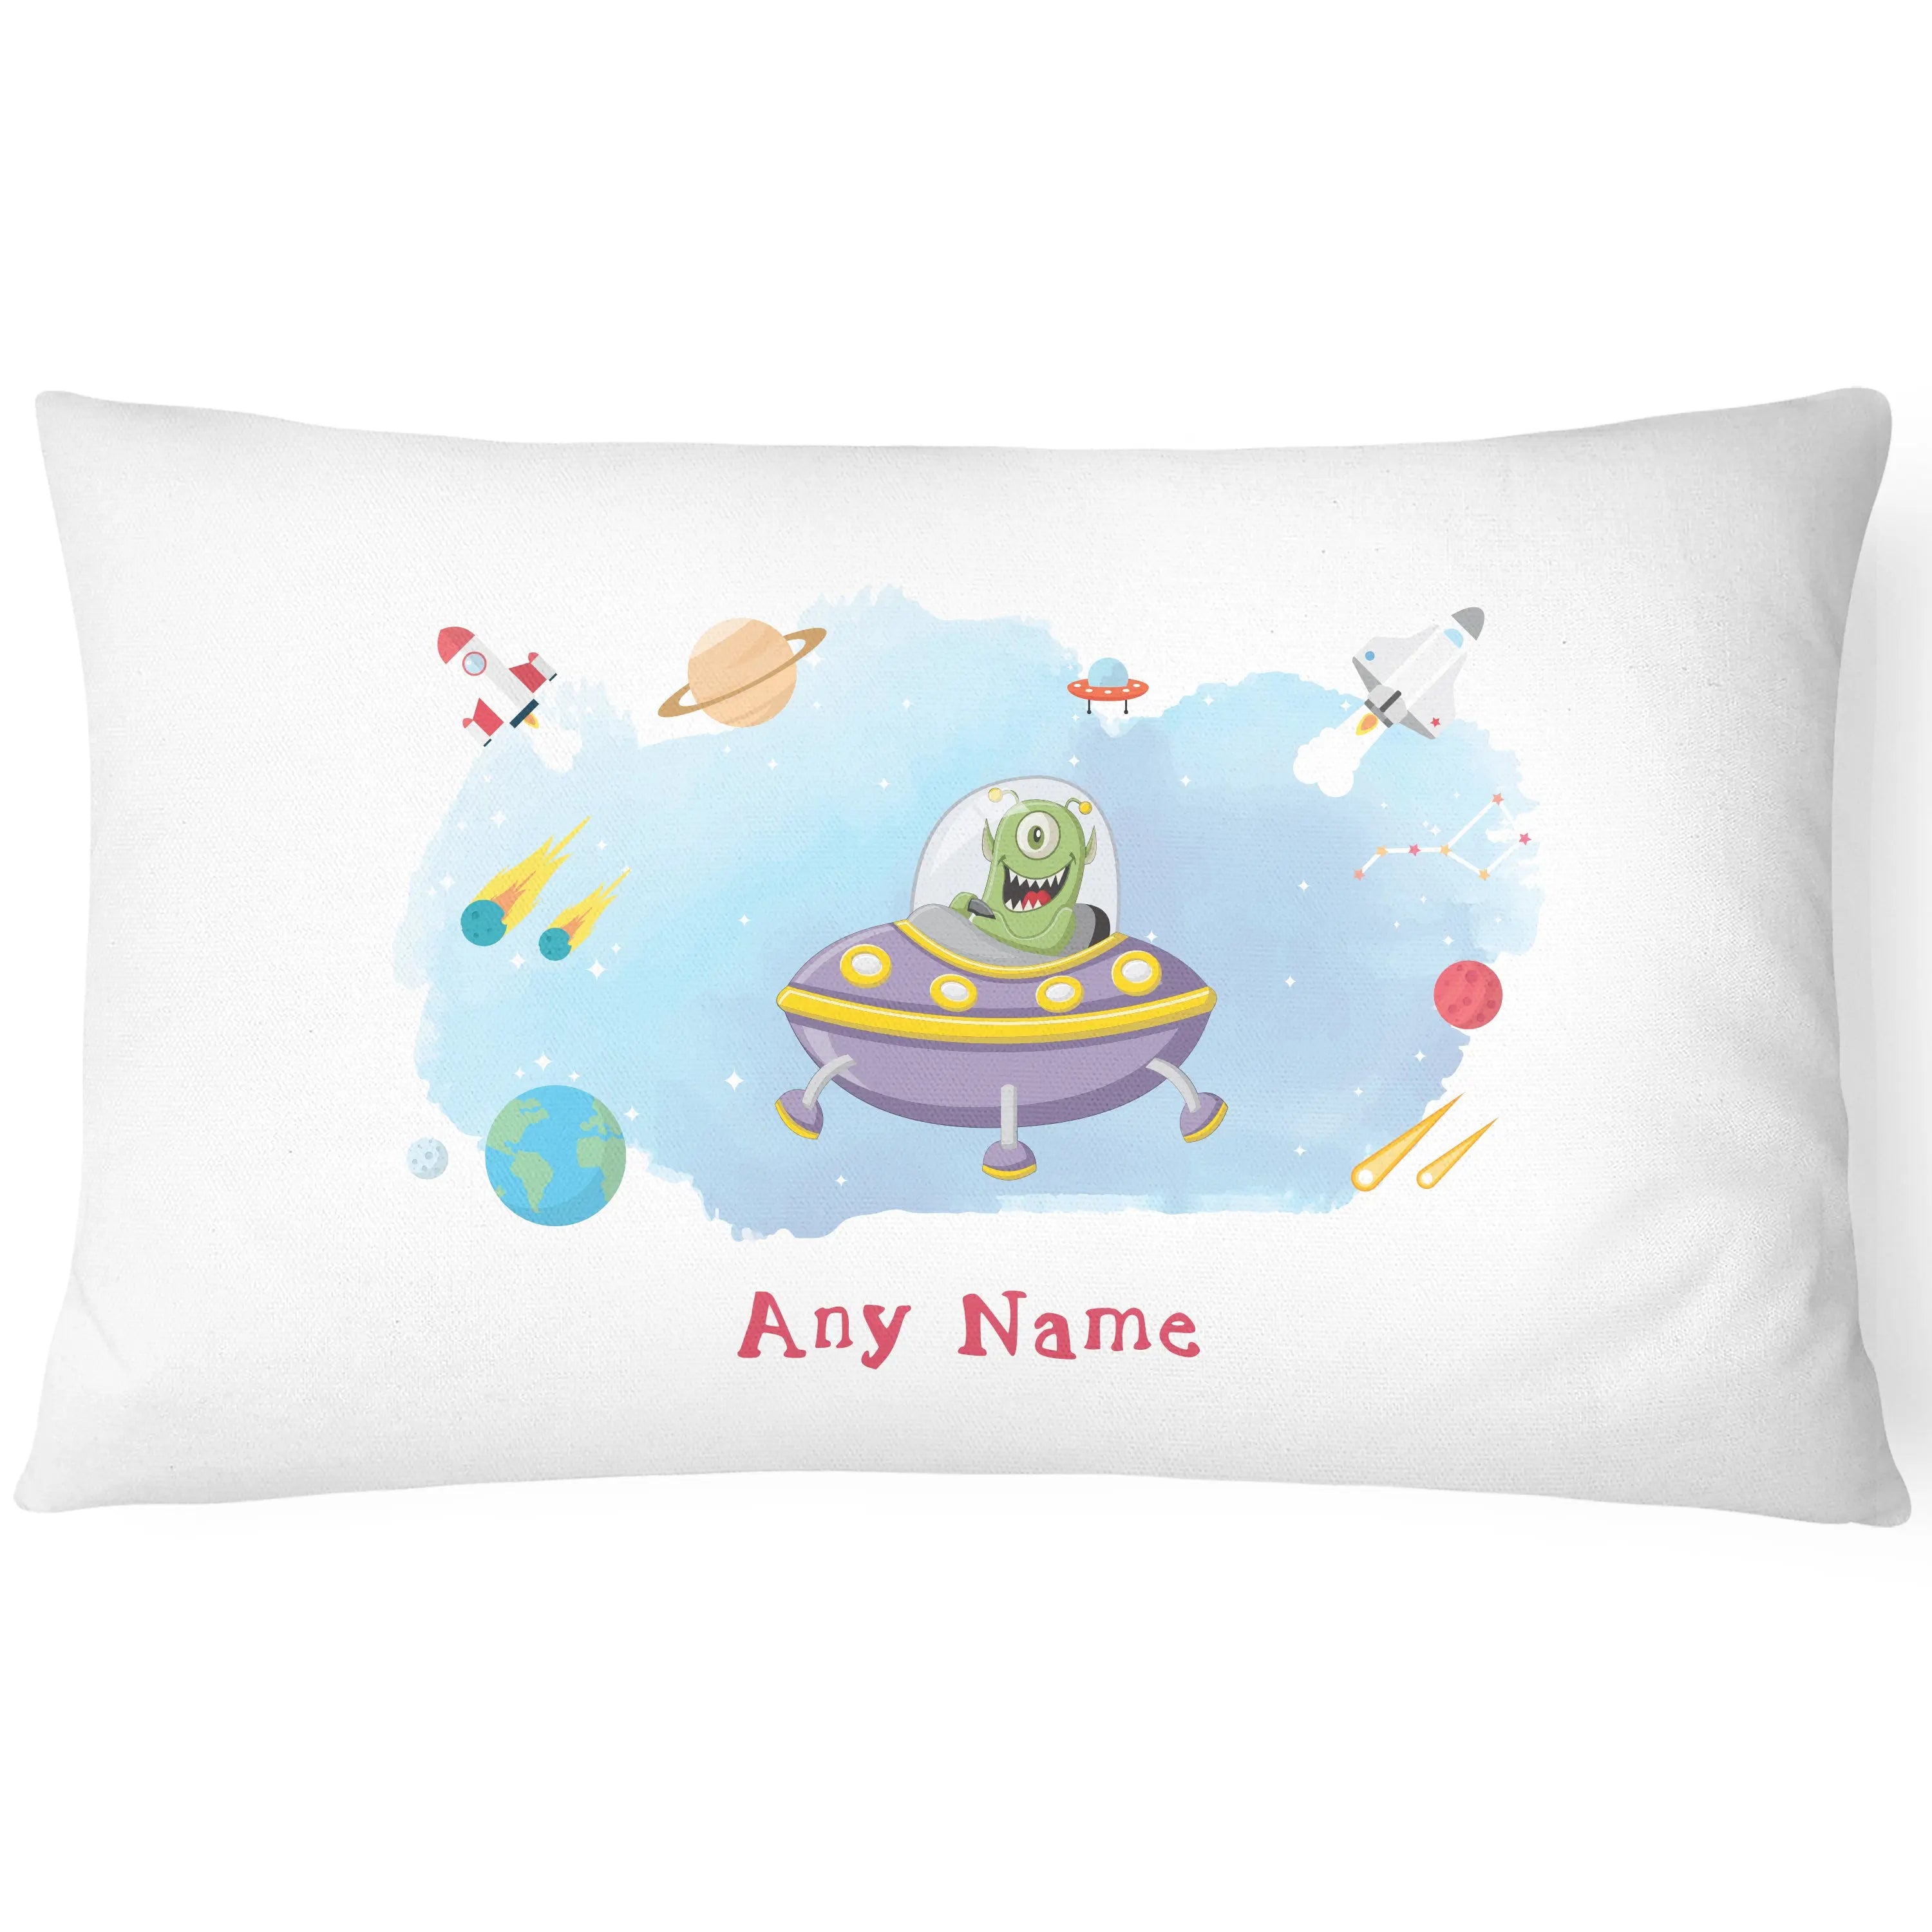 Space Pillowcase for Kids - Personalise With Any Name - Outer World